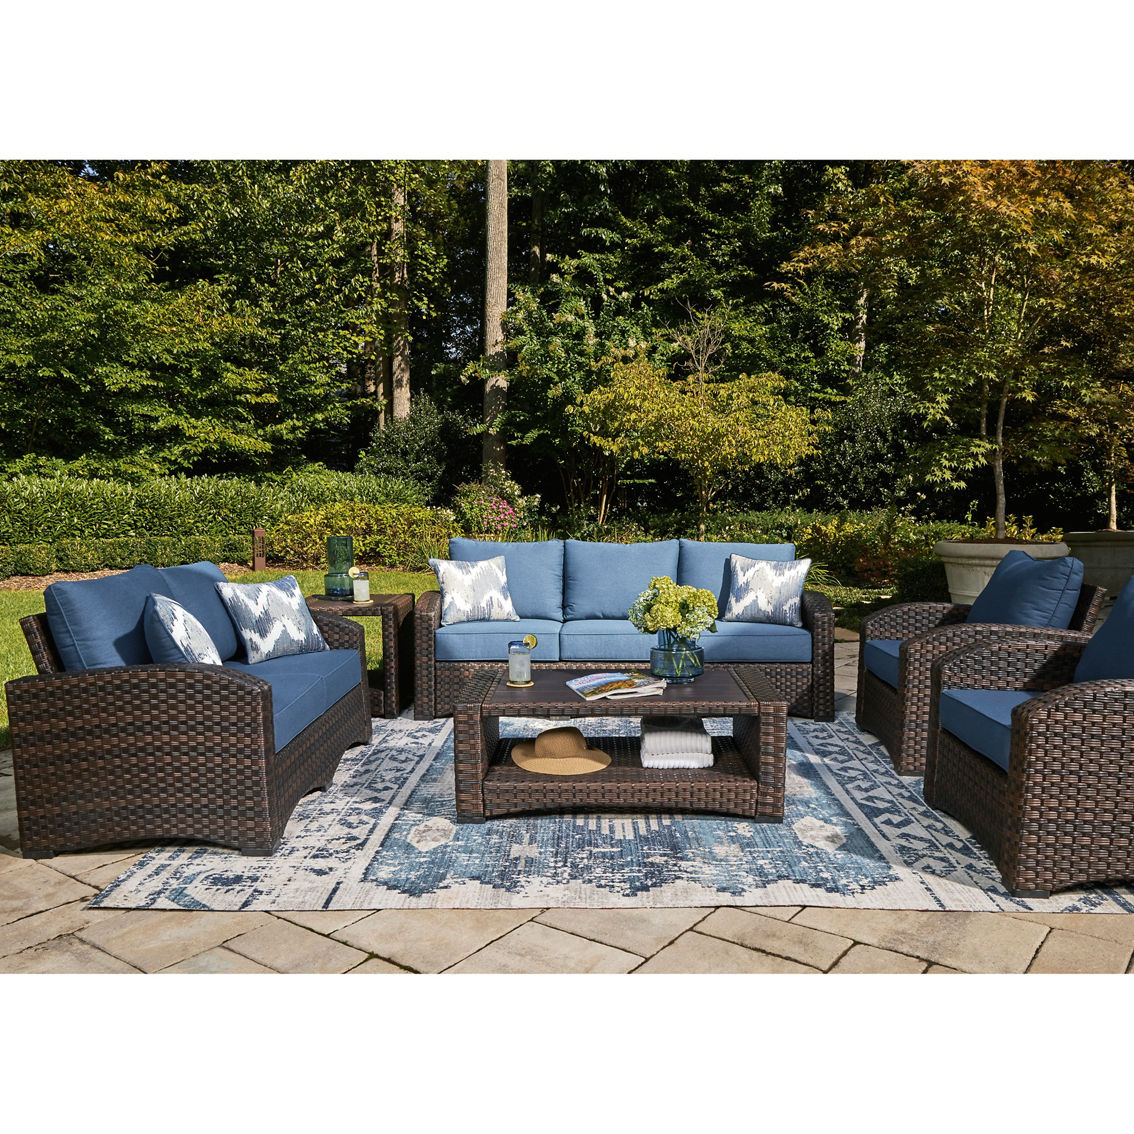 Signature Design by Ashley Windglow Outdoor Lounge Chair with Cushion - Image 3 of 3